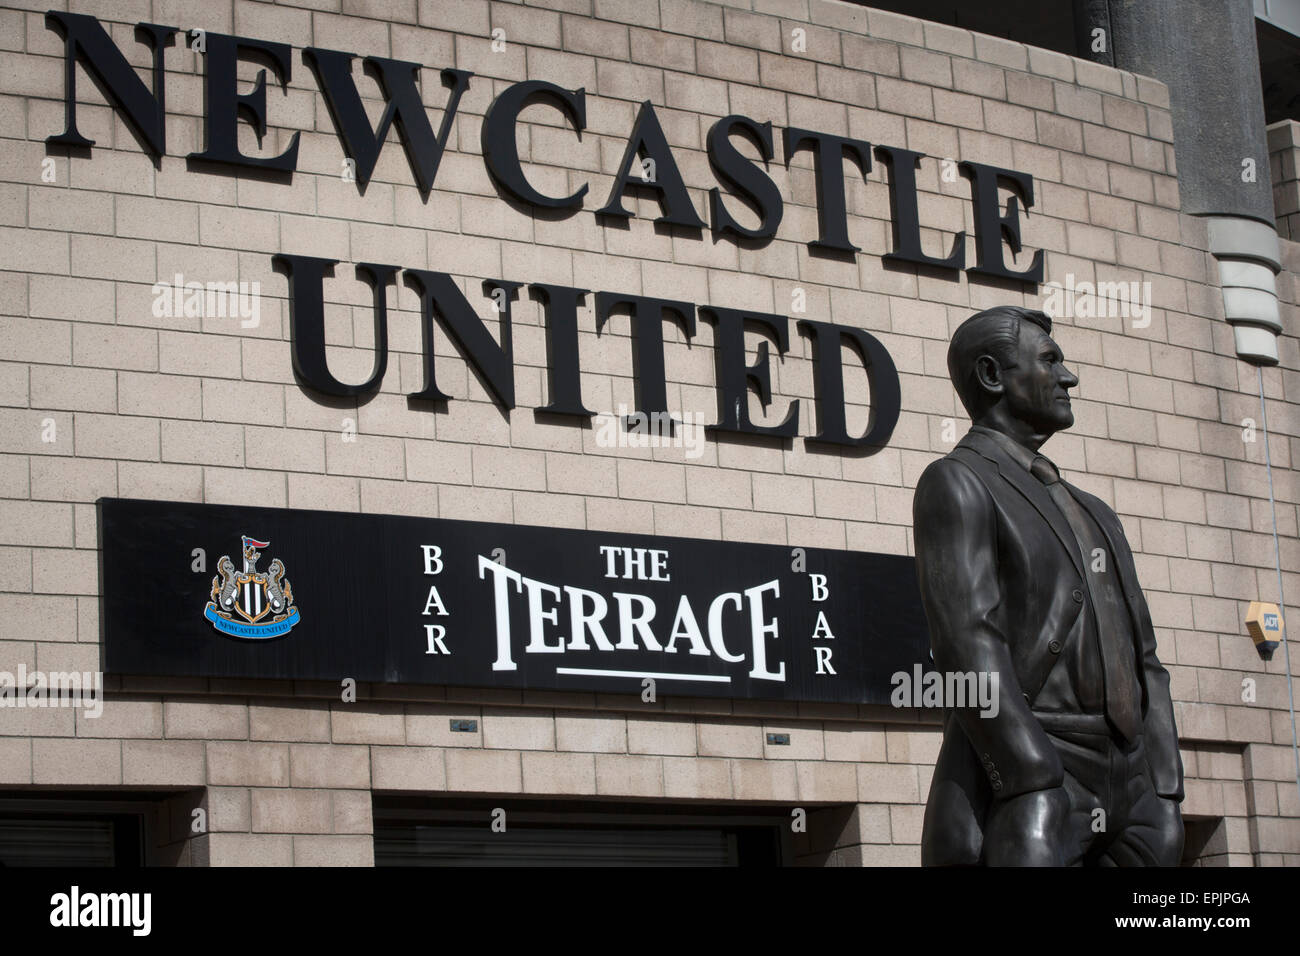 The statue to former manager Sir Bobby Robson, situated outside the Milburn Stand of the stadium before Newcastle United host Tottenham Hotspurs in an English Premier League match at St. James' Park. The match was boycotted by a section of the home support critical of the role of owner Mike Ashley and sponsorship by a payday loan company. The match was won by Spurs by 3-1, watched by 47,427, the lowest league gate of the season at the stadium. Stock Photo